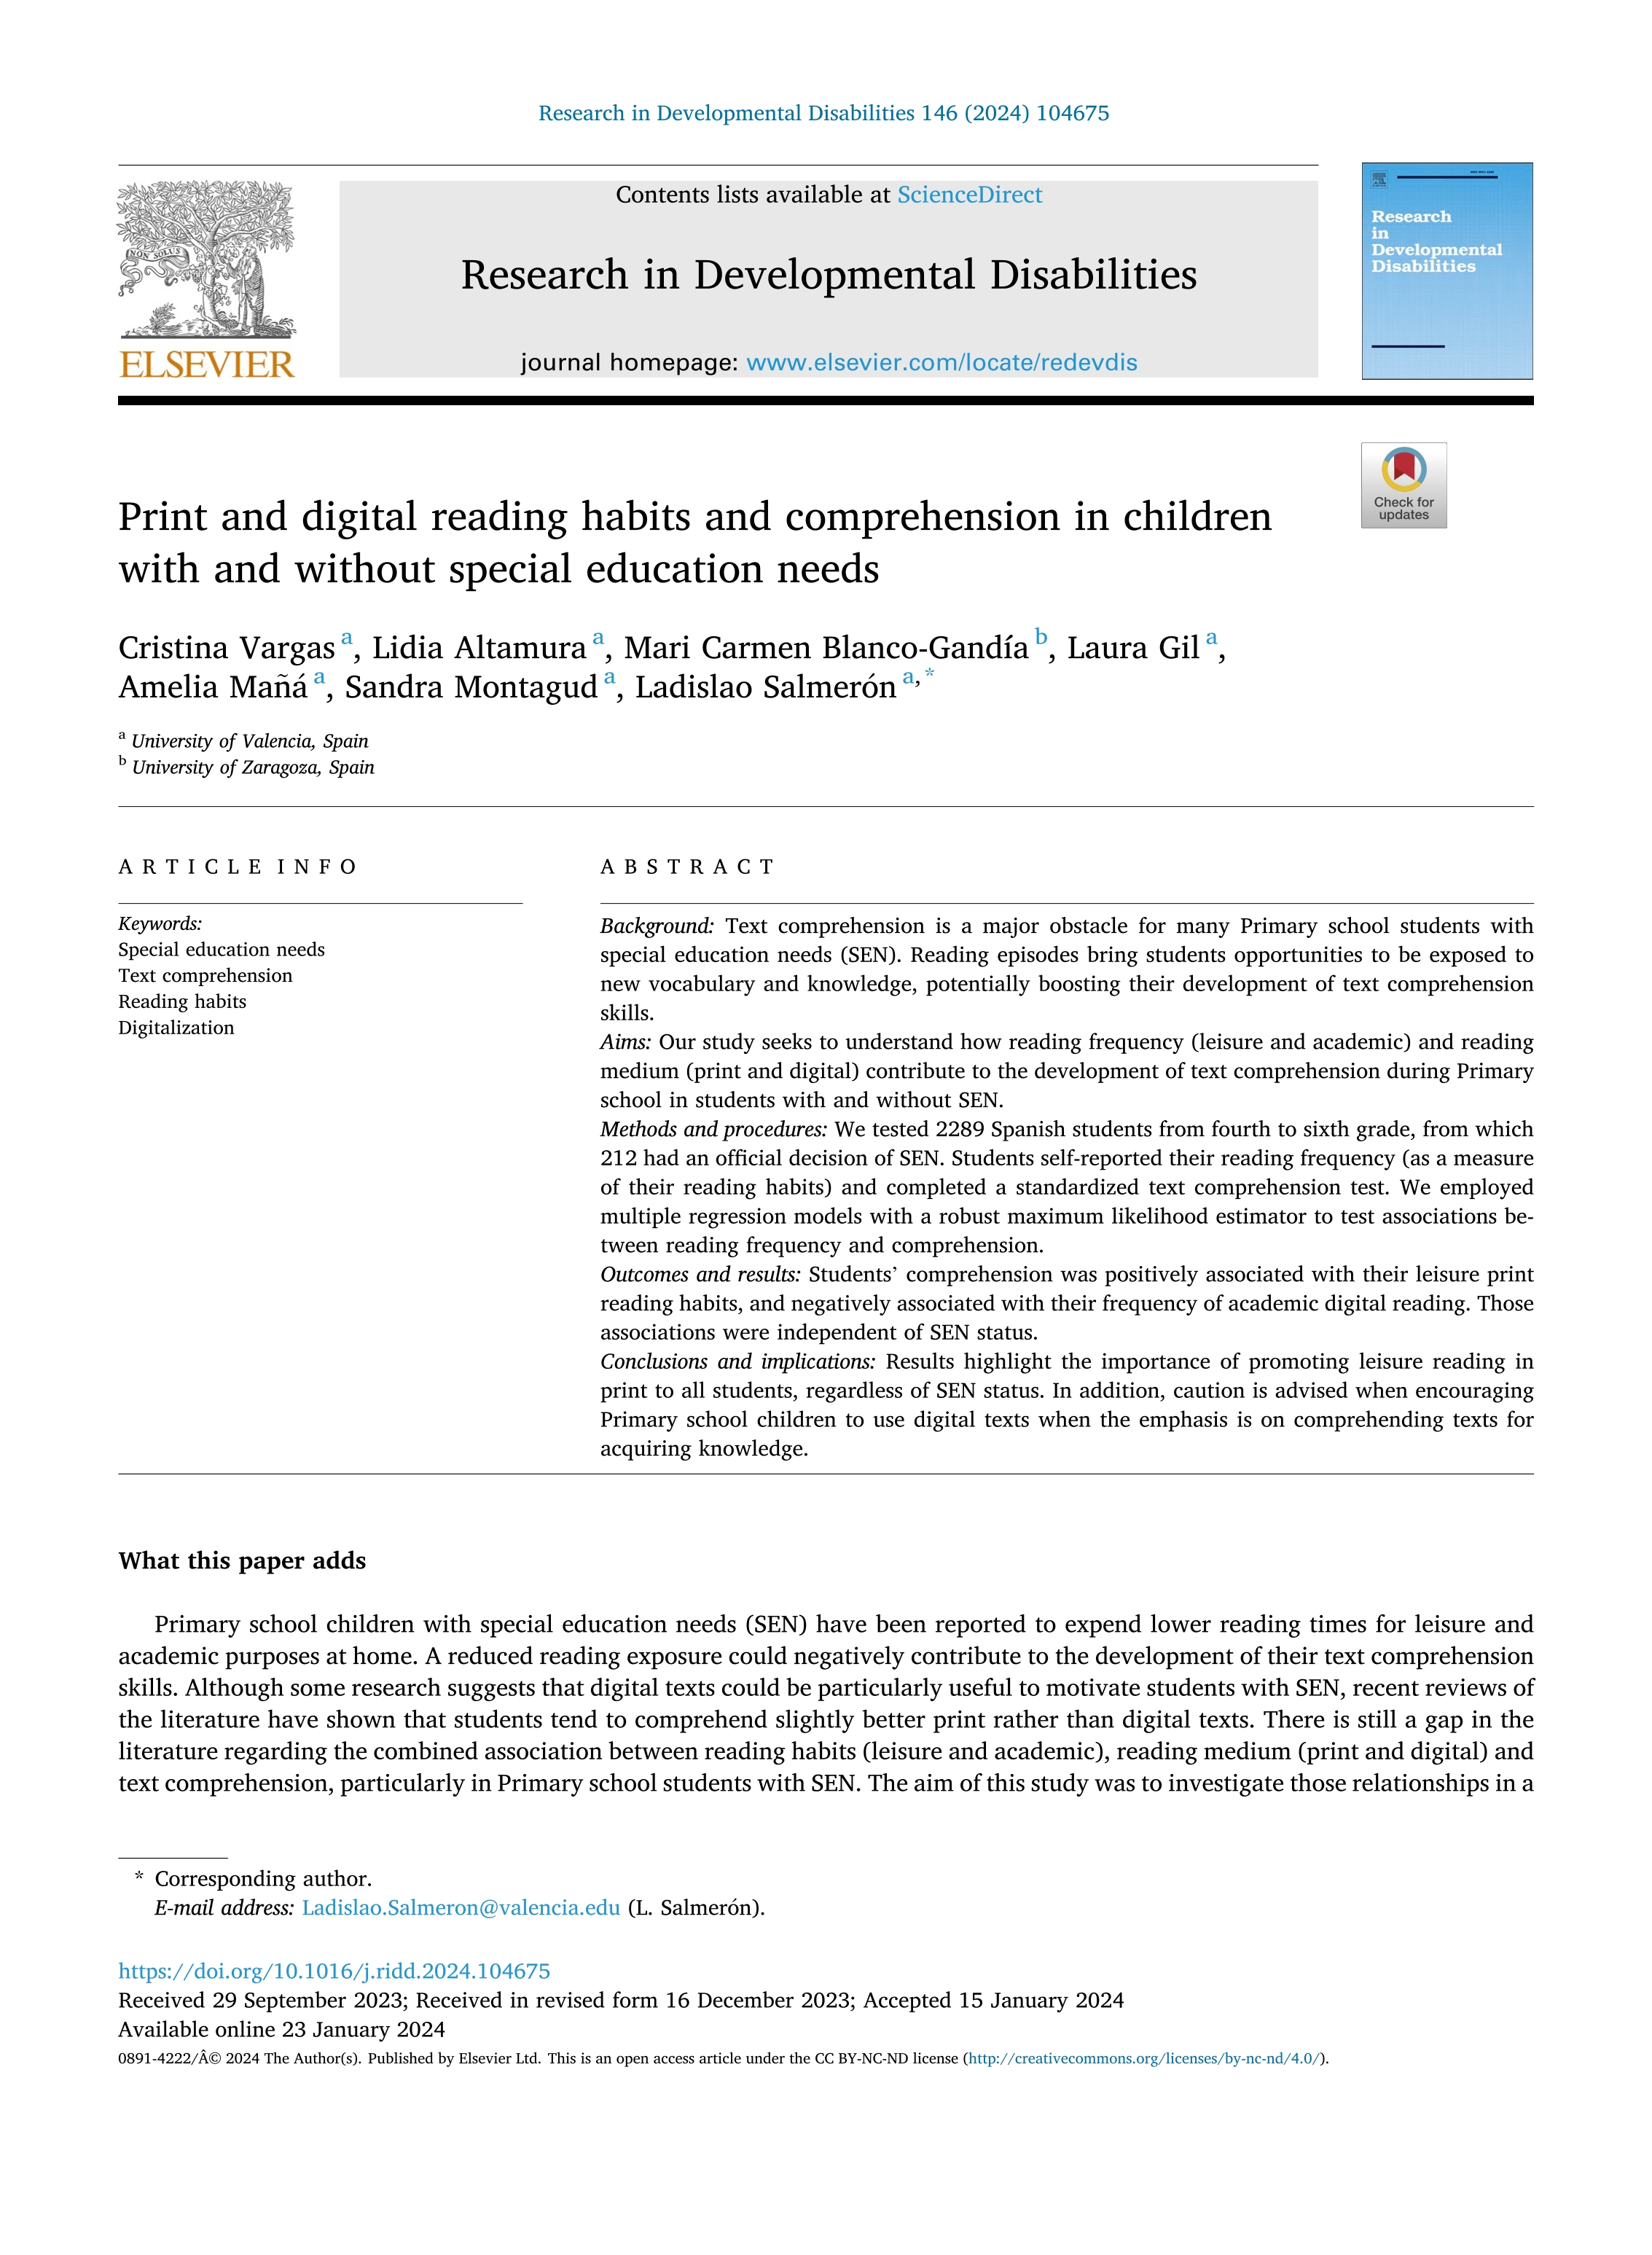 Print and digital reading habits and comprehension in children with and without special education needs